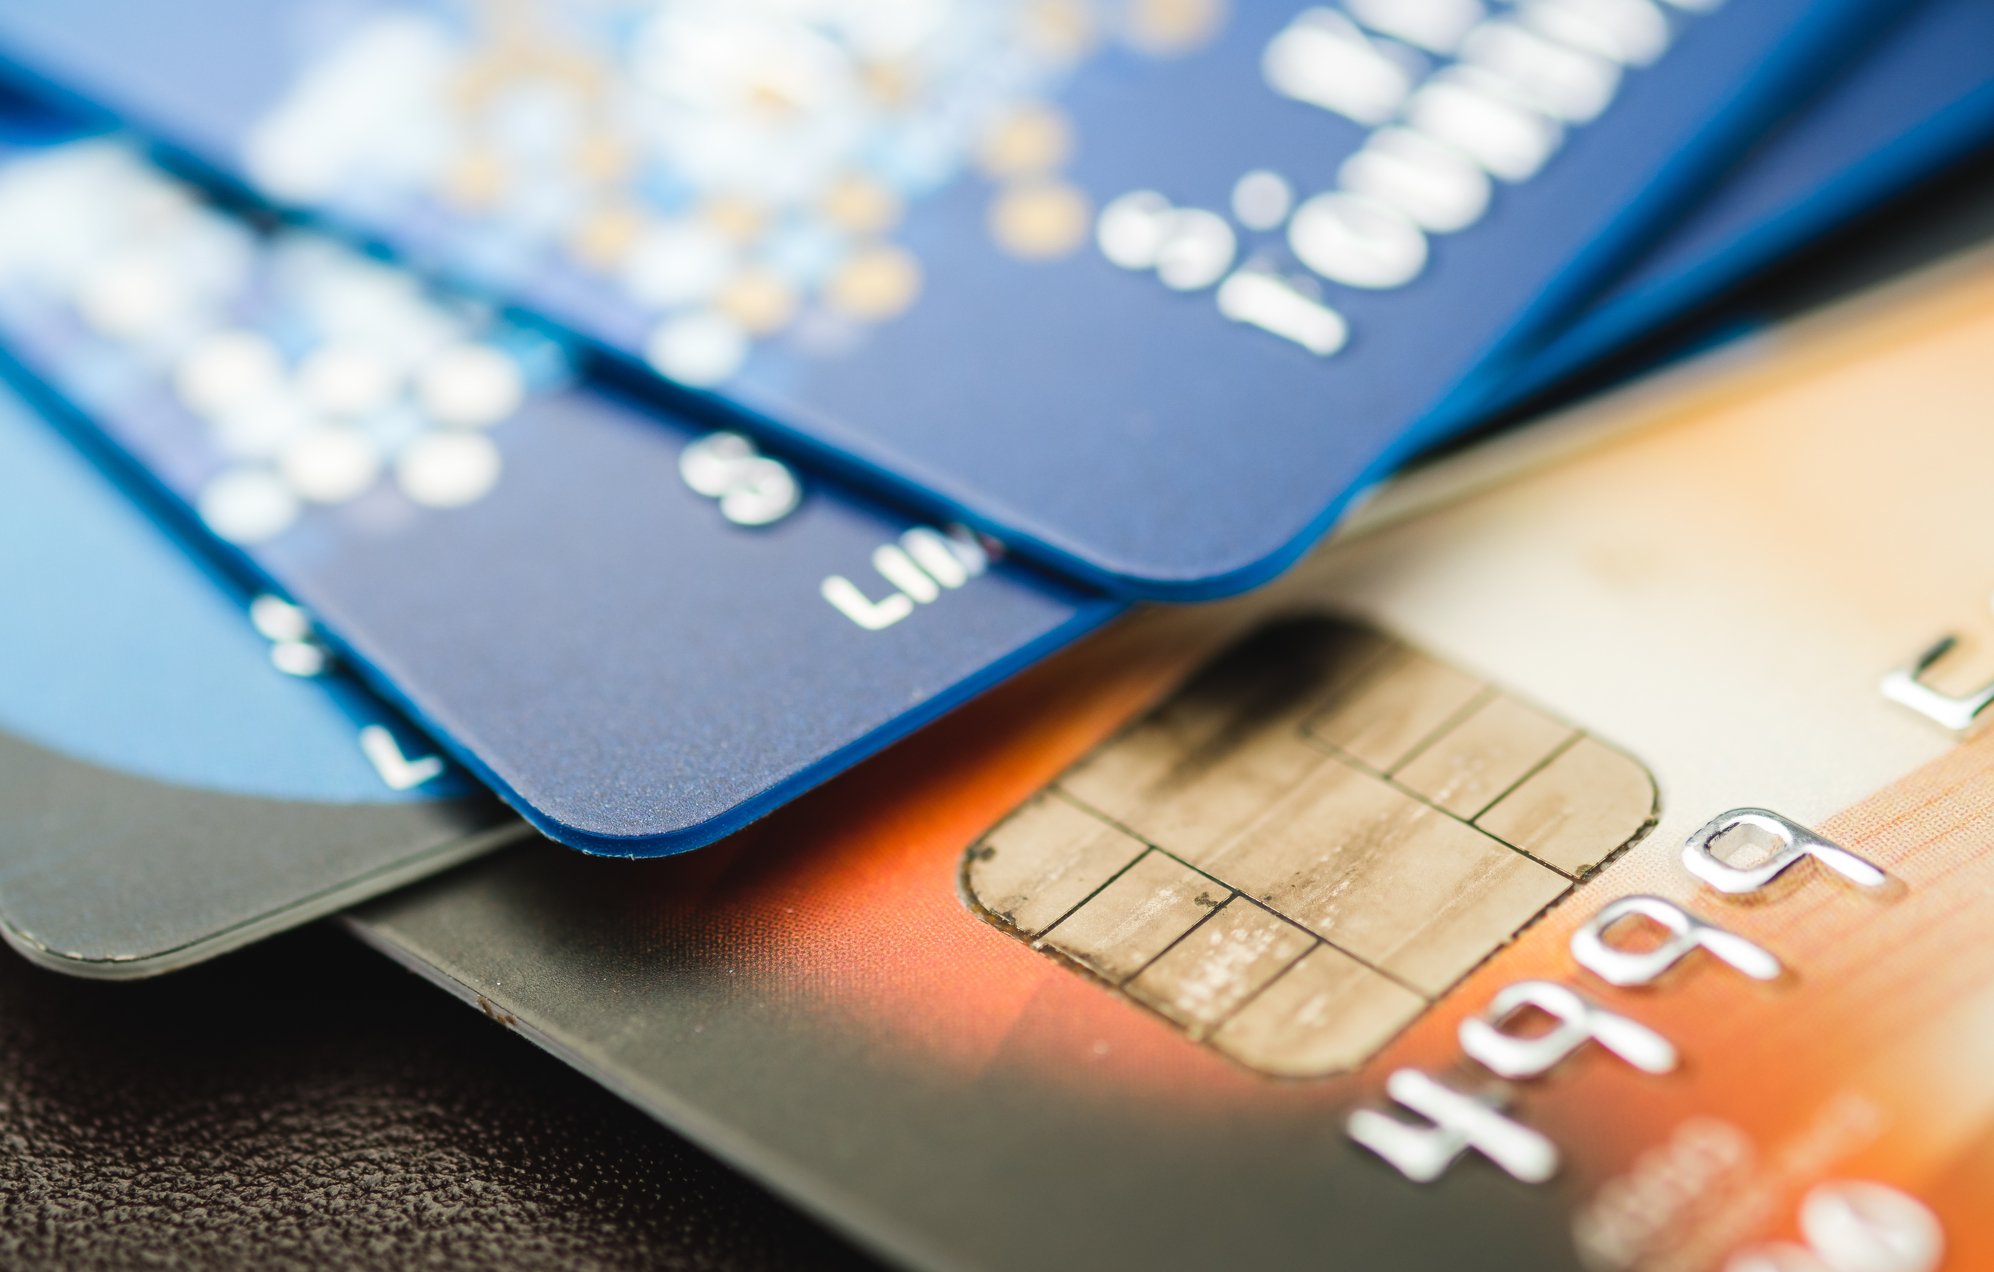 Safetybank comments on the recent CSCS card scheme fraud scandal